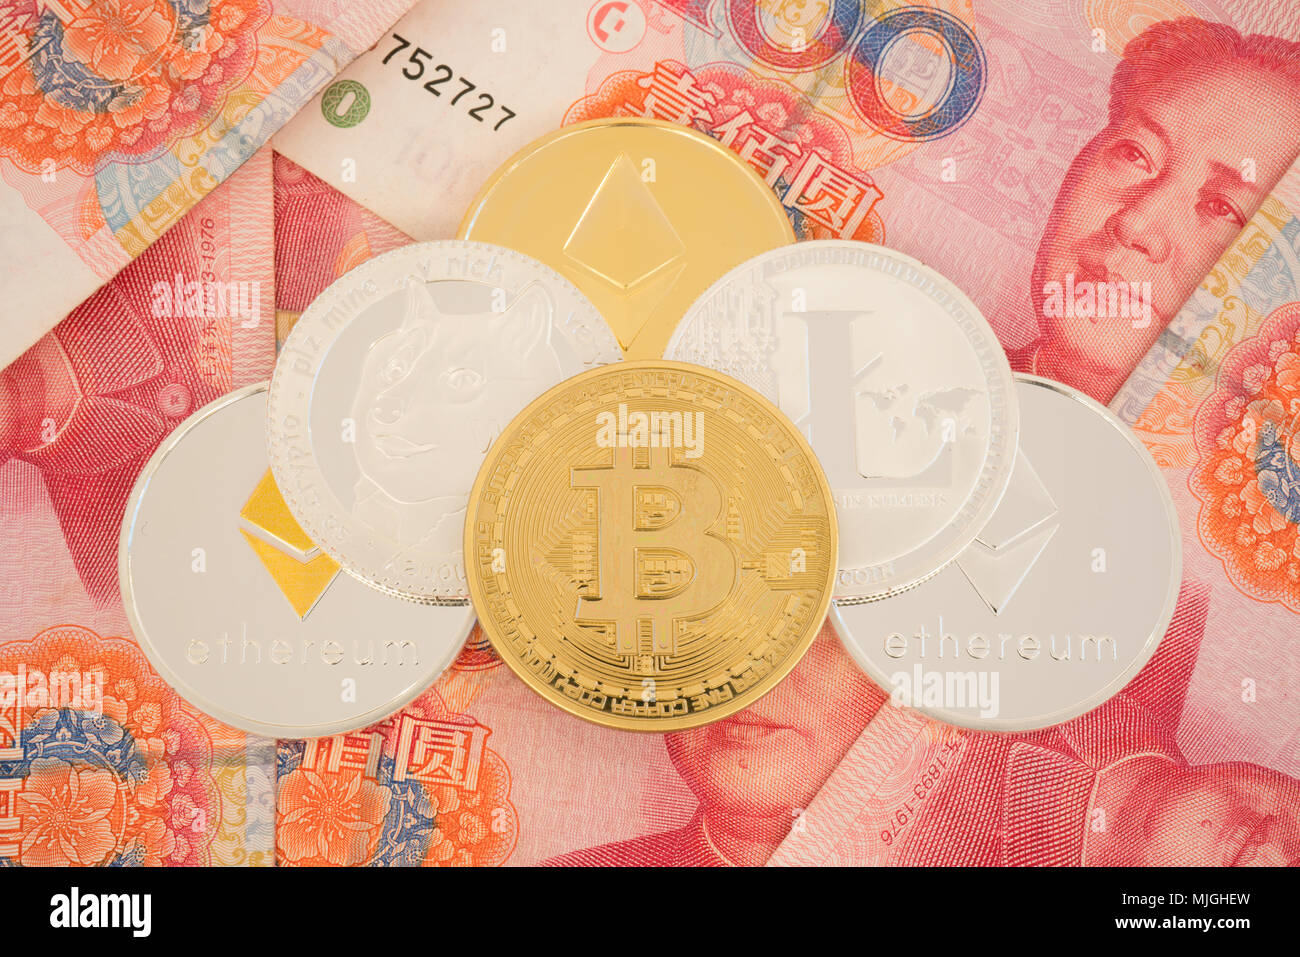 Real cryptocurrency coins on chinese yuan bills - crypto currency in china concept Stock Photo